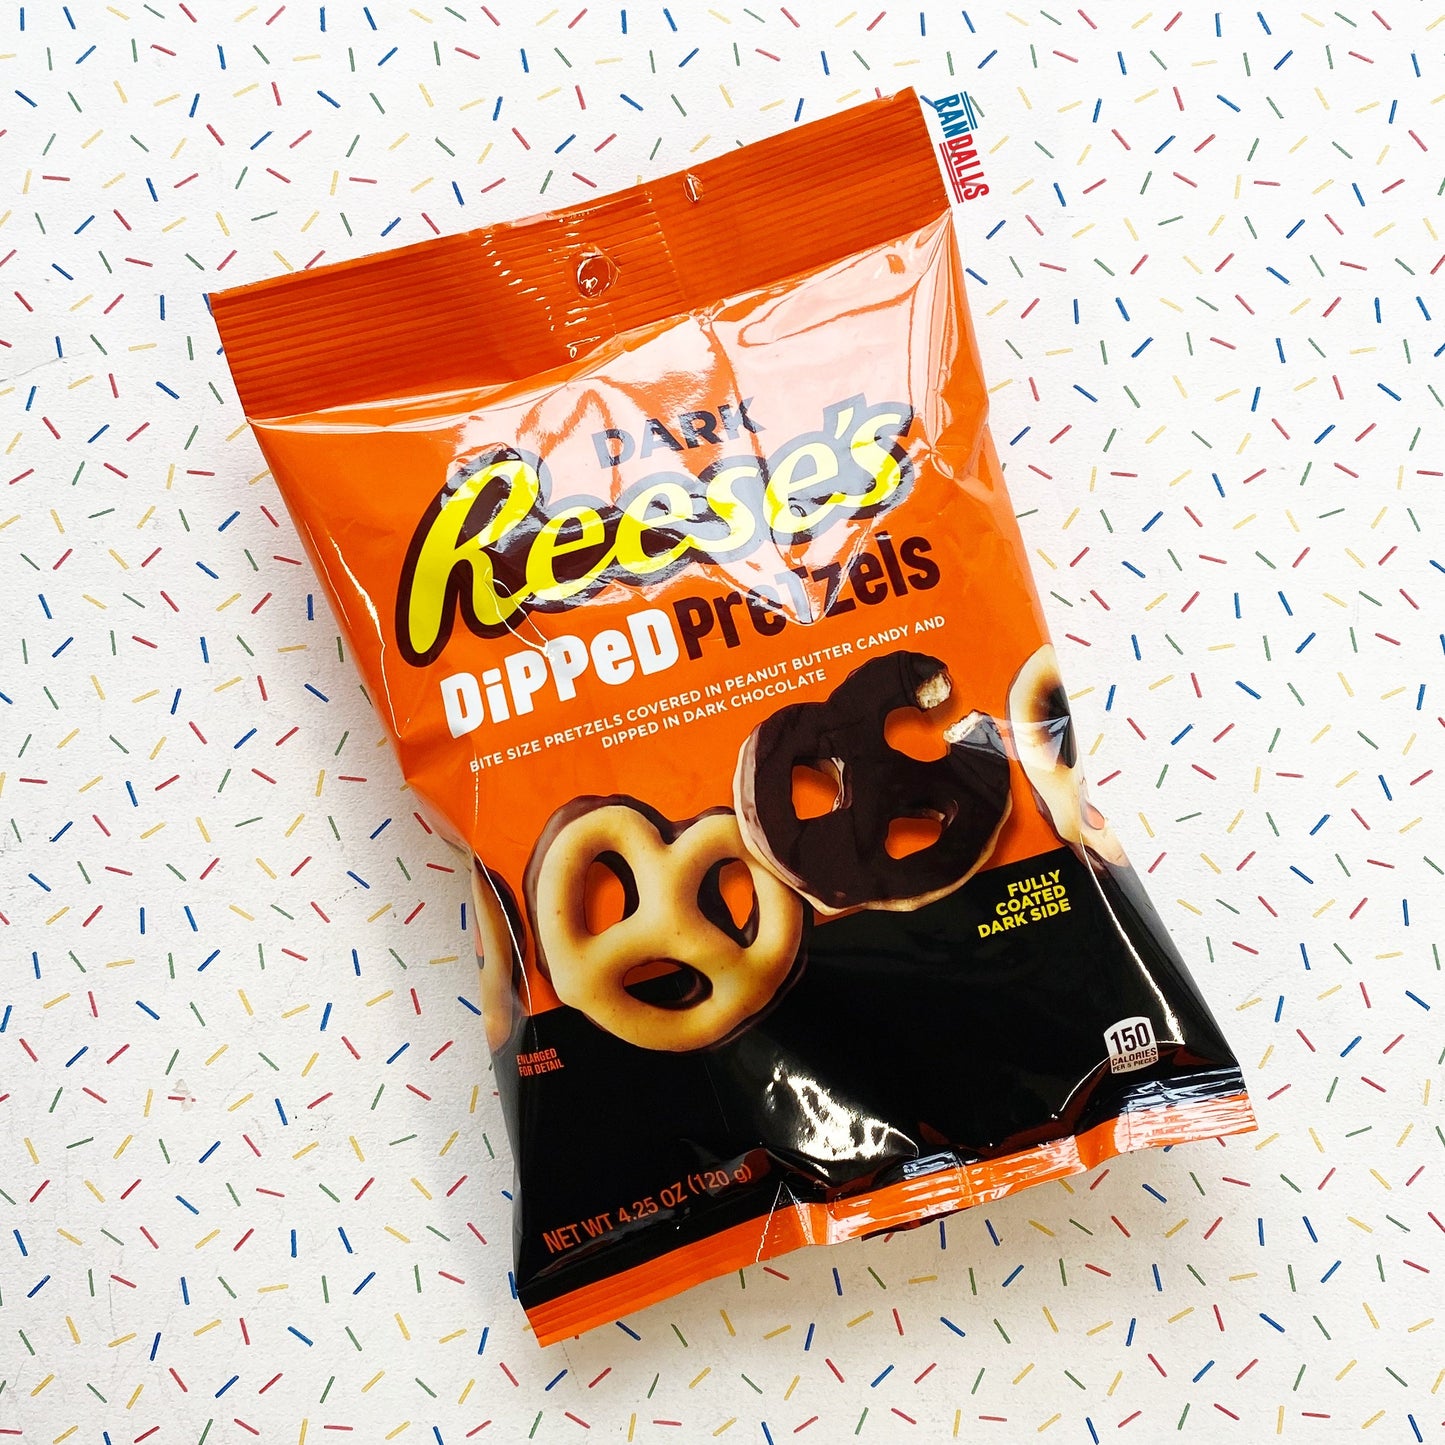 reese's dark dipped pretzels, bite size pretzels covered in peanut butter candy and dipped in  dark chocolate, dark reese's, hershey's, peanut butter chocolate, peanut butter dark chocolate, american chocolate, usa, randalls,